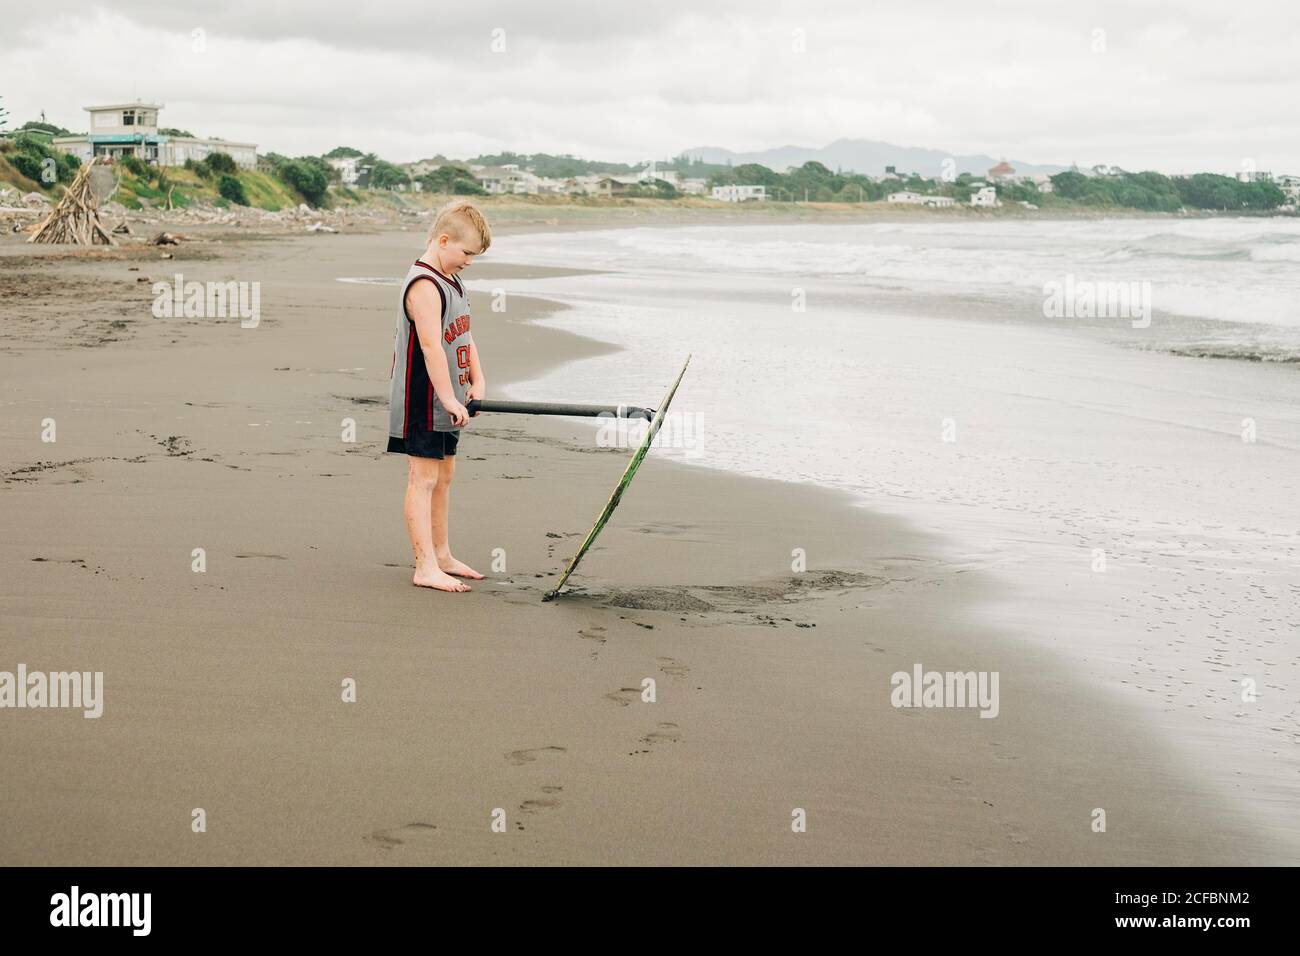 Young boy standing on the beach with his skim board Stock Photo